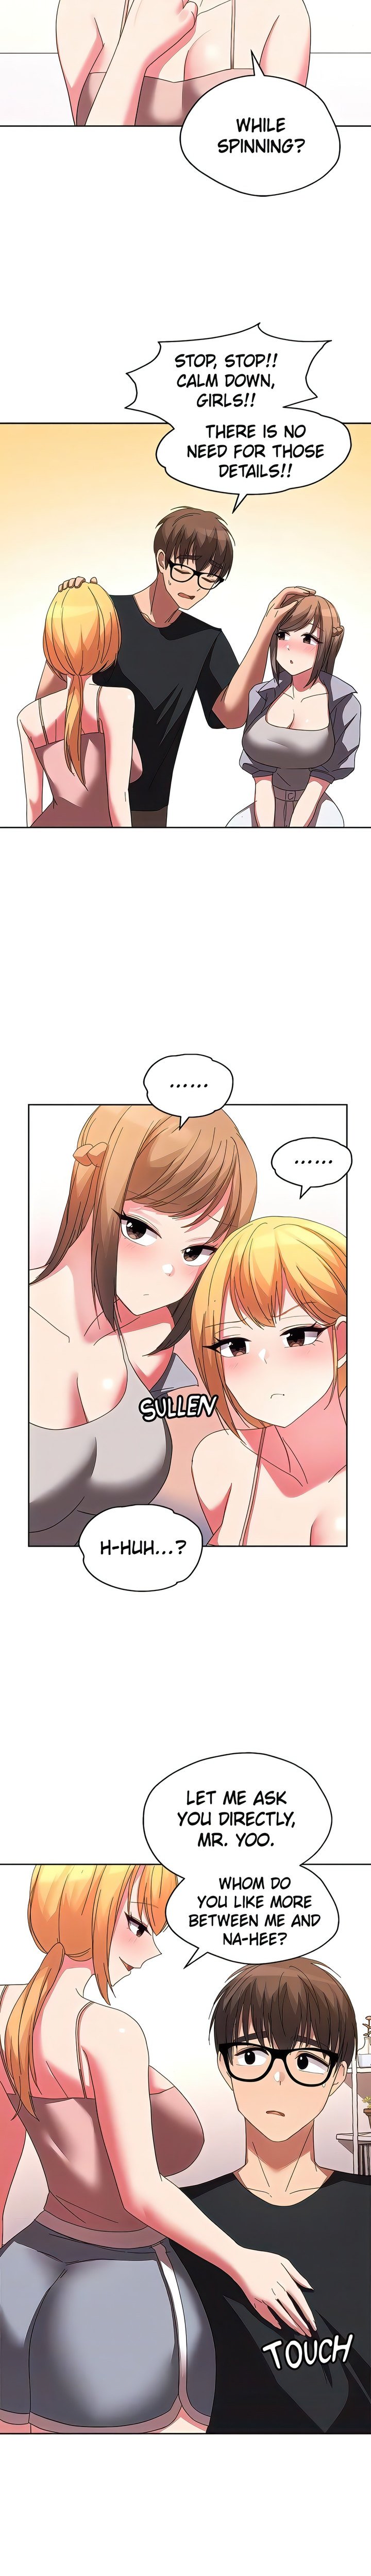 girls-i-used-to-teach-chap-31-14